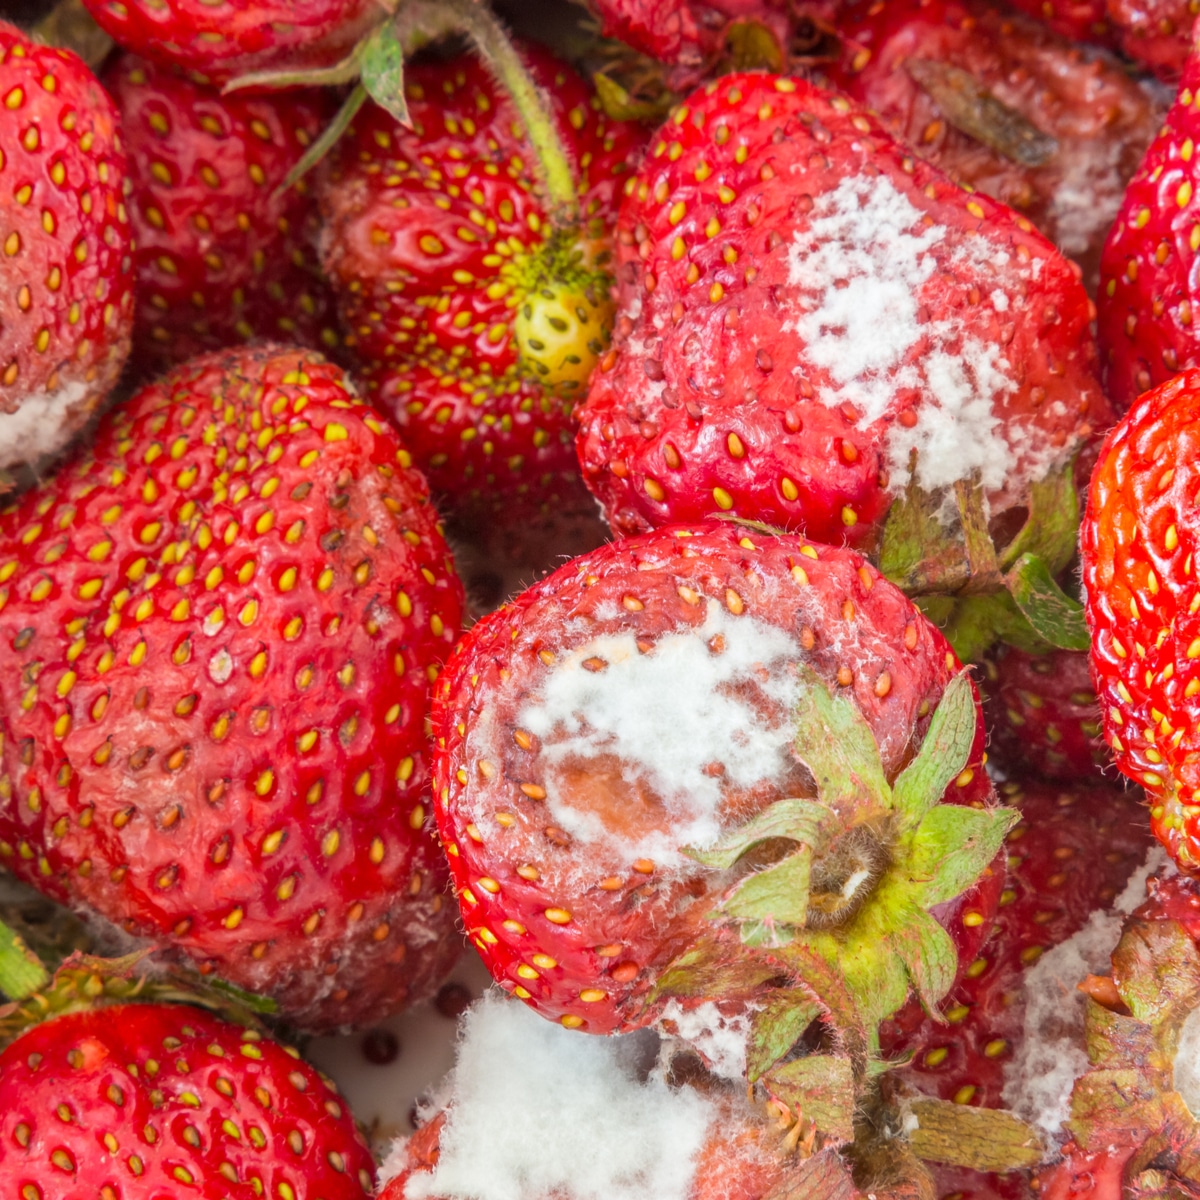 Is It Safe To Eat Moldy Strawberries?